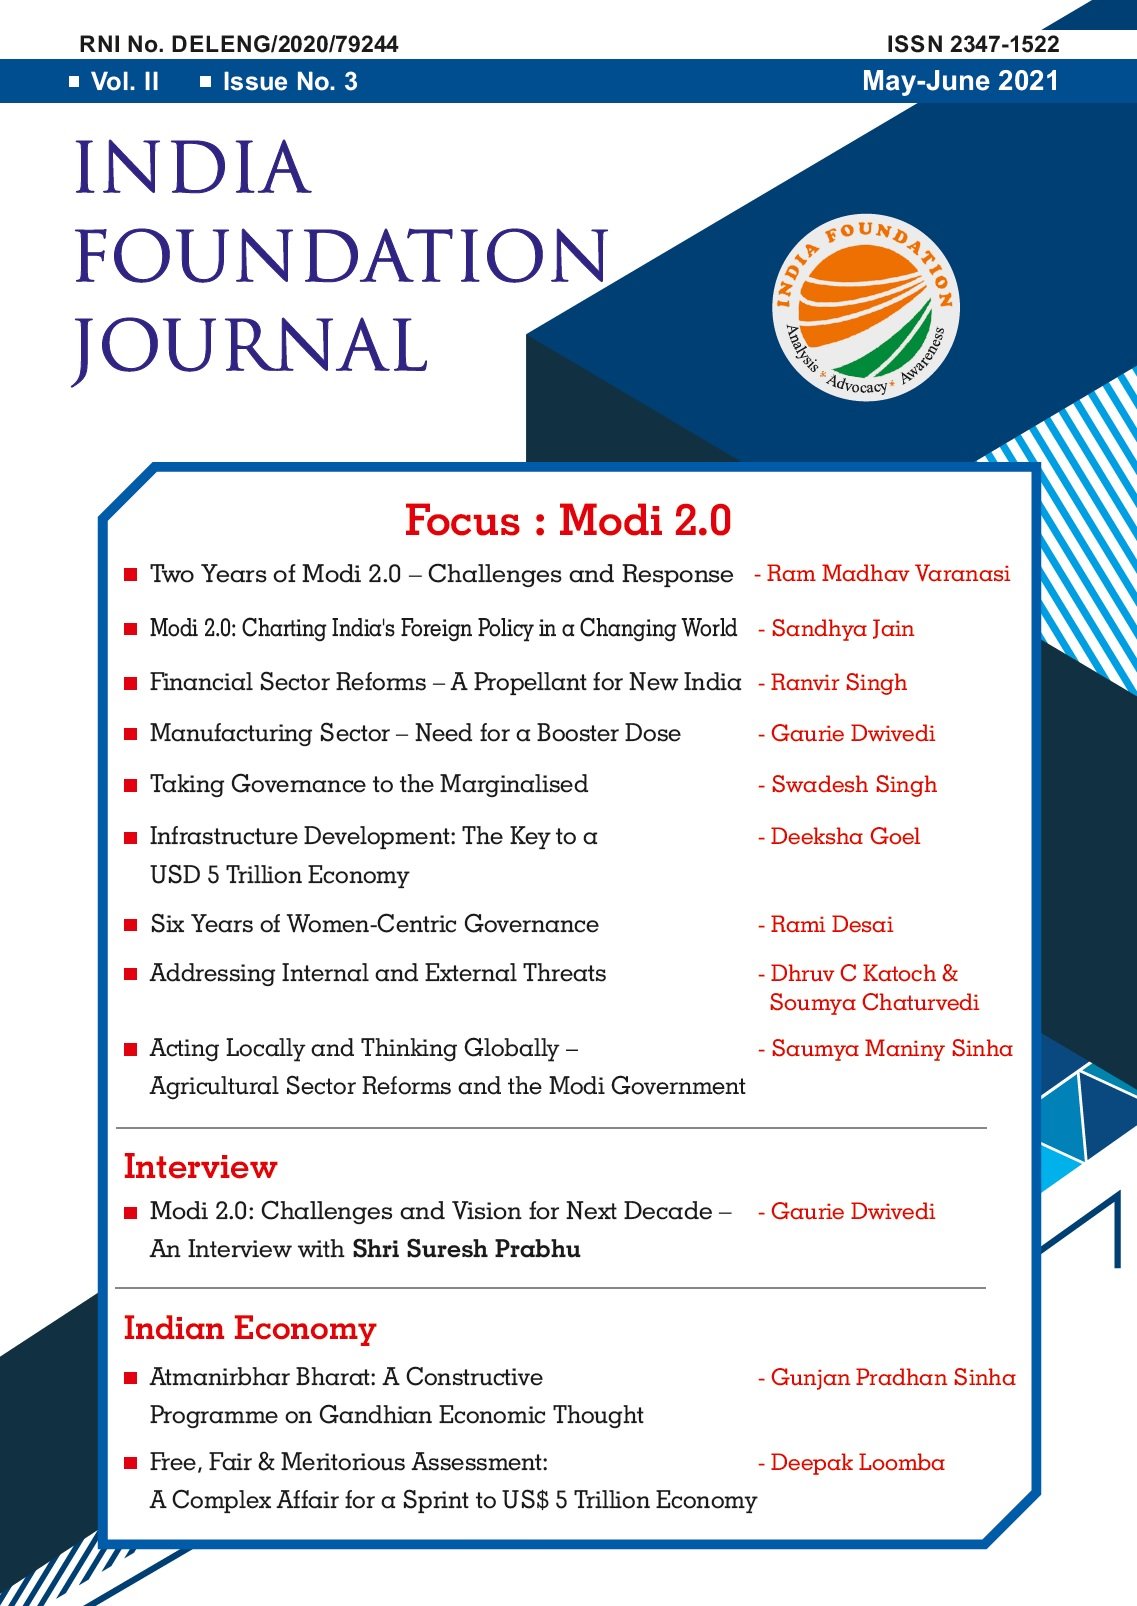 India Foundation Journal May-June 2021